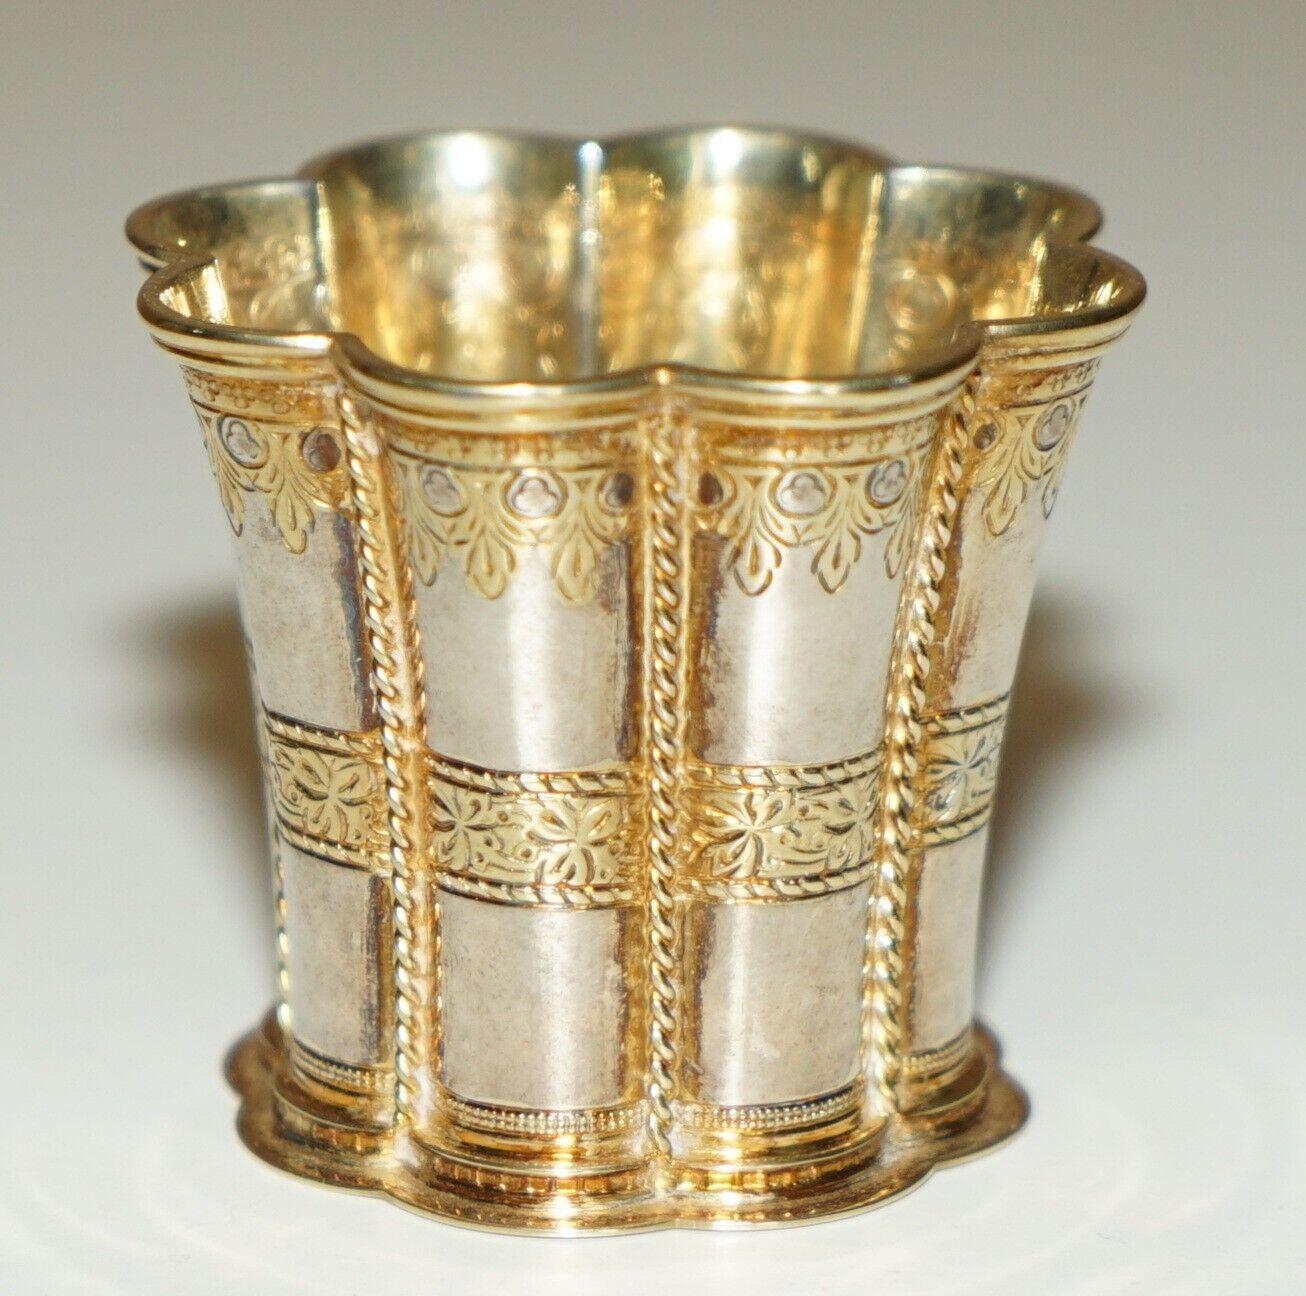 Royal House Antiques

Royal House Antiques is delighted to offer for this stunning period gold gilt Solid Sterling Silver 1967 dated Queen Margreth cup which has a gold gilt finish

I have another of these listed under my other items which is